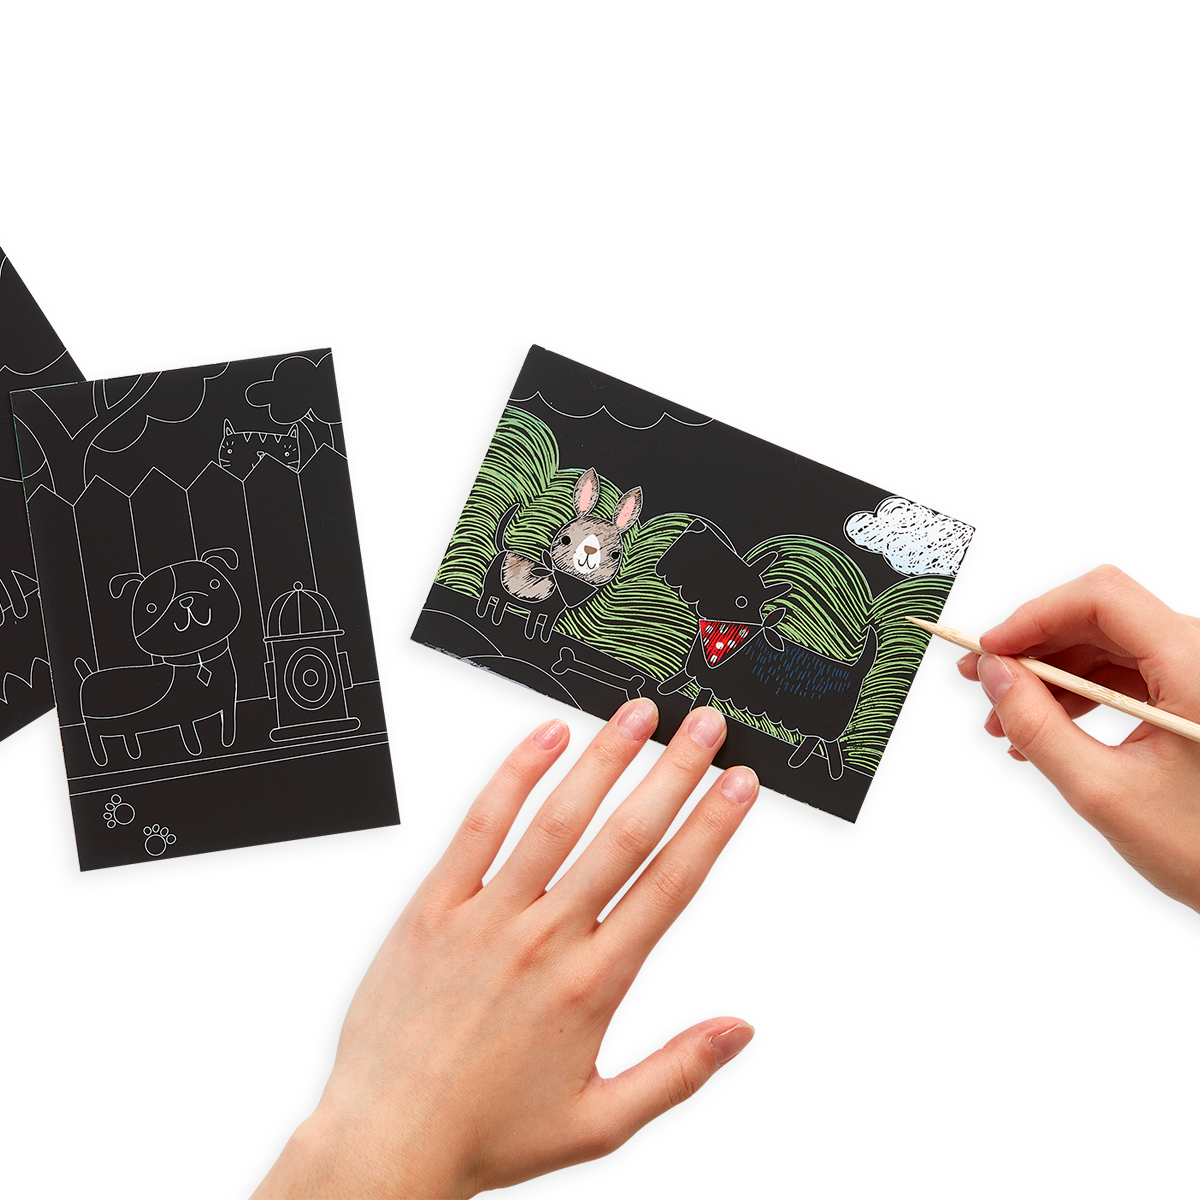 Hands scratching the Playful Pups Scratch and Scribble Mini Scratch Art Kit with the included wooden stylus